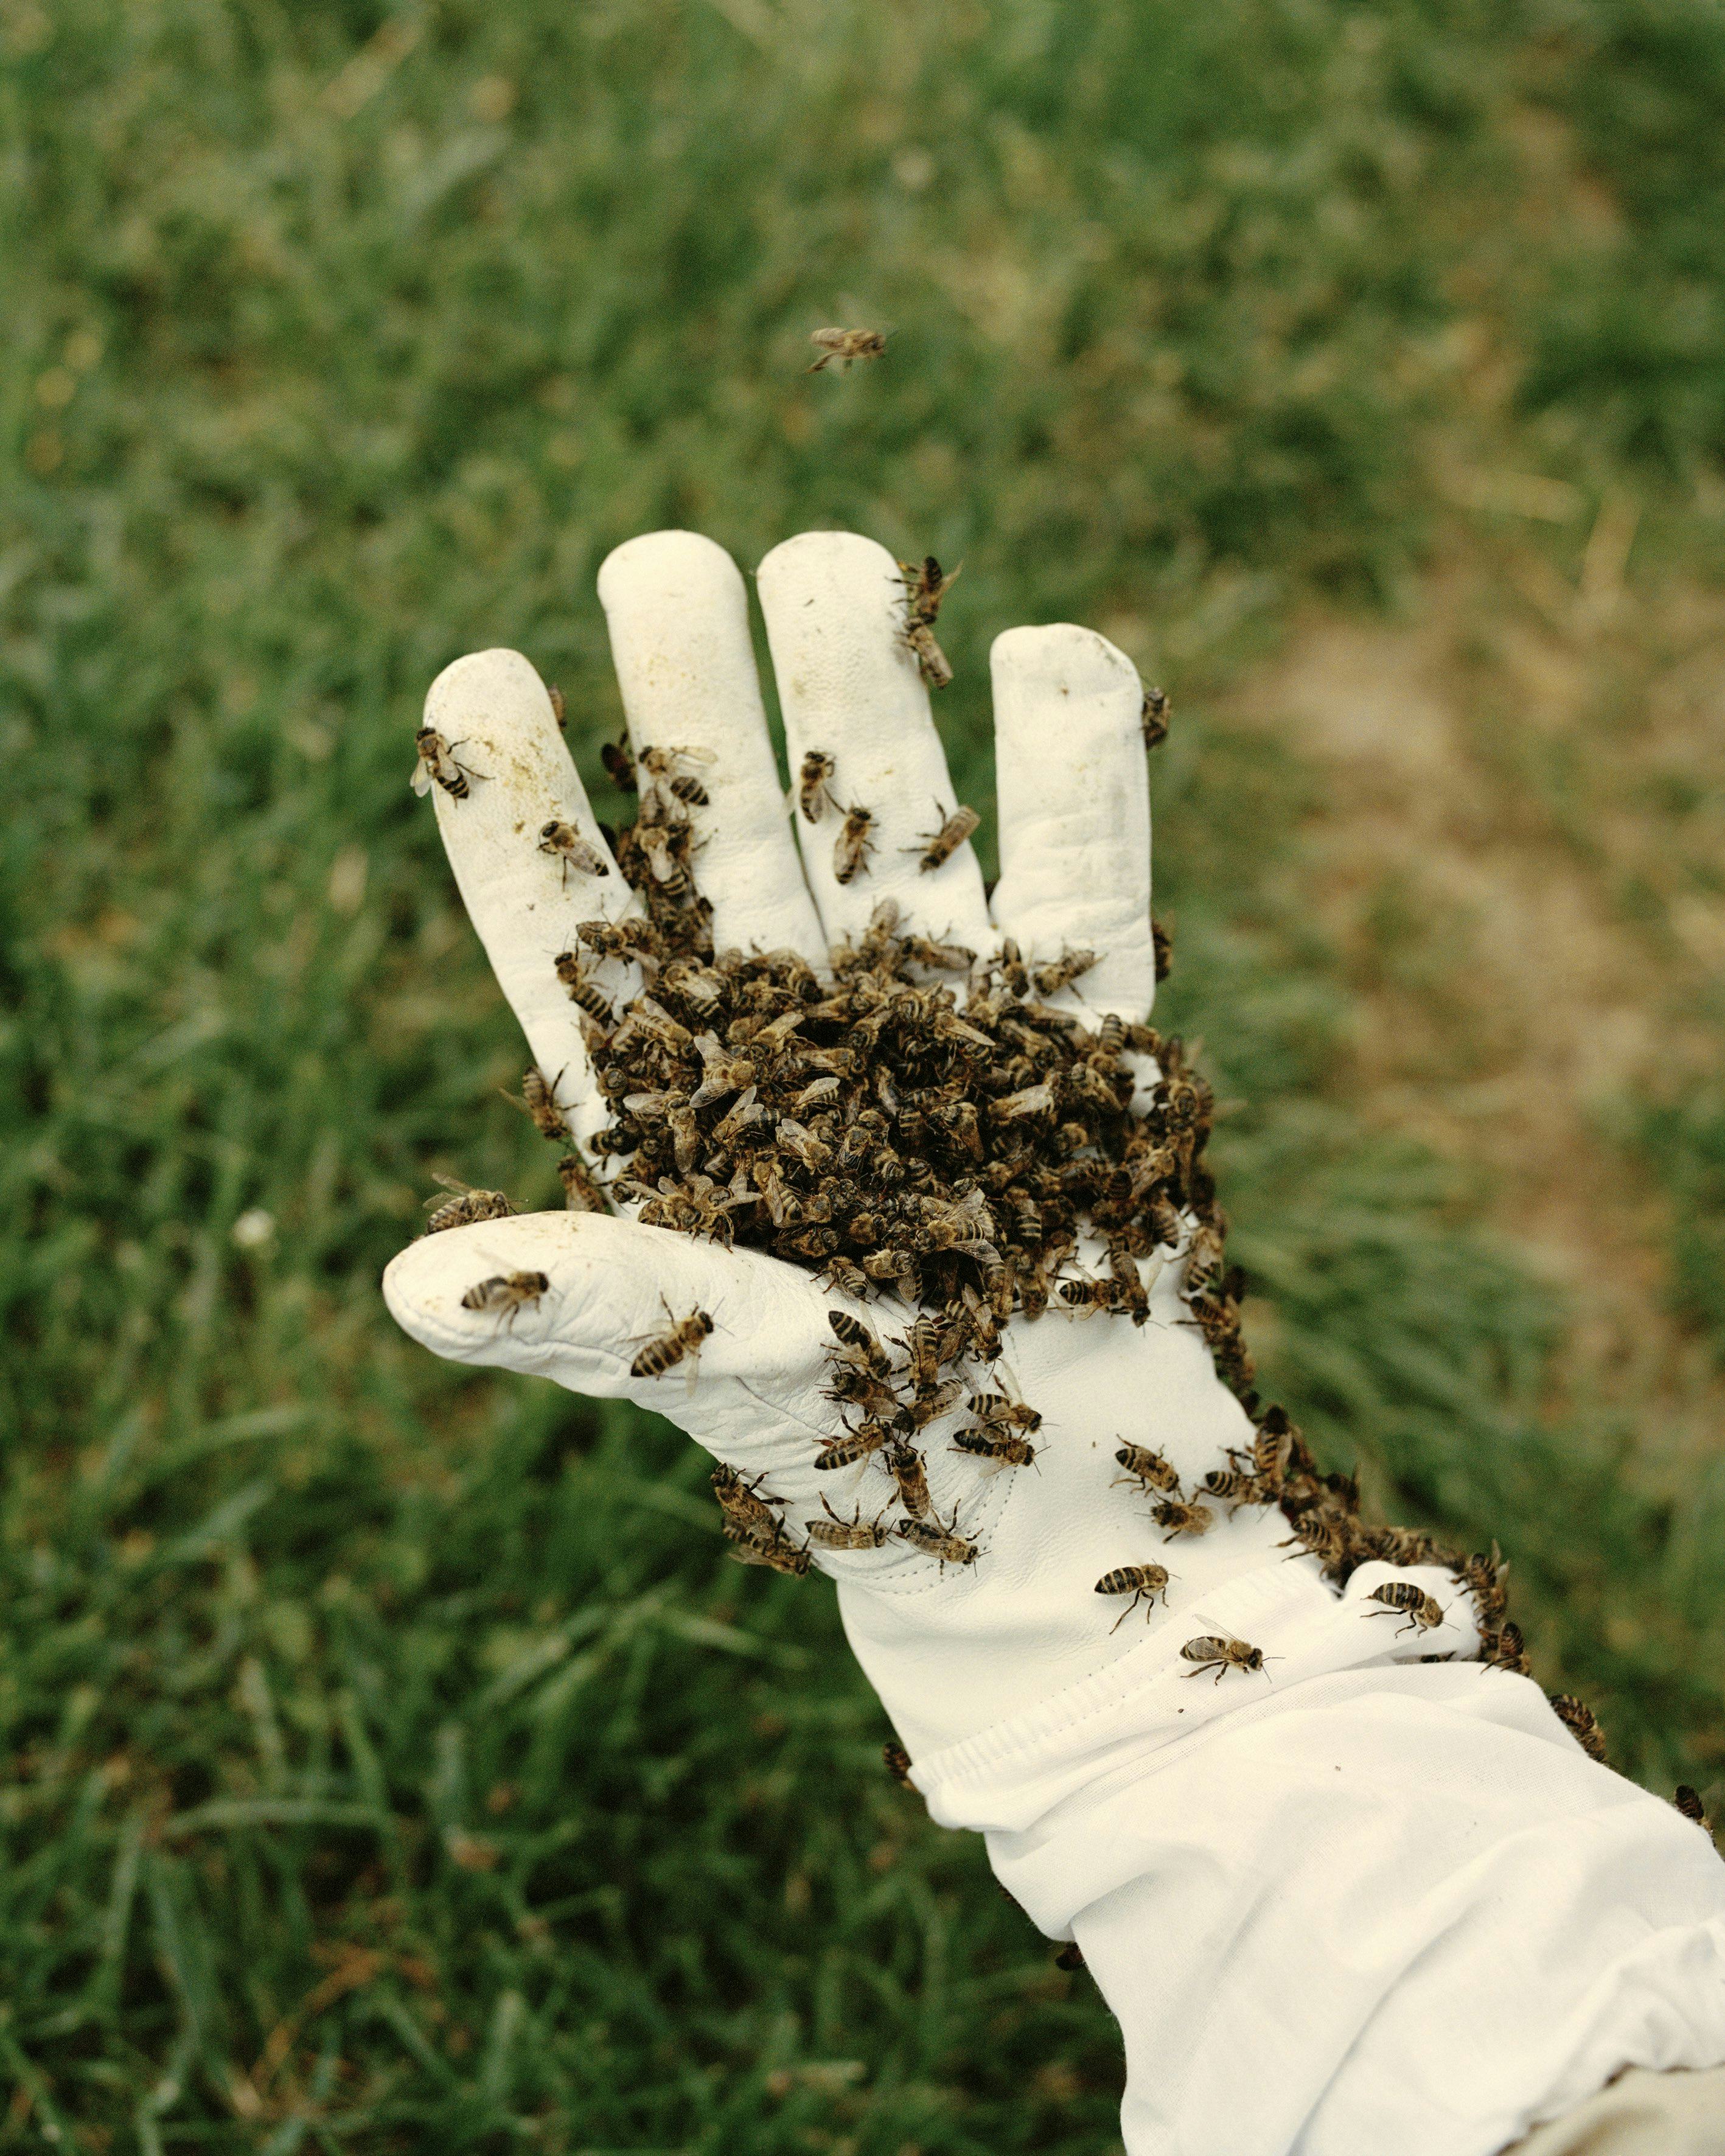 Image of a bee keeper's hand (wearing a white glove) with a swarm of bees